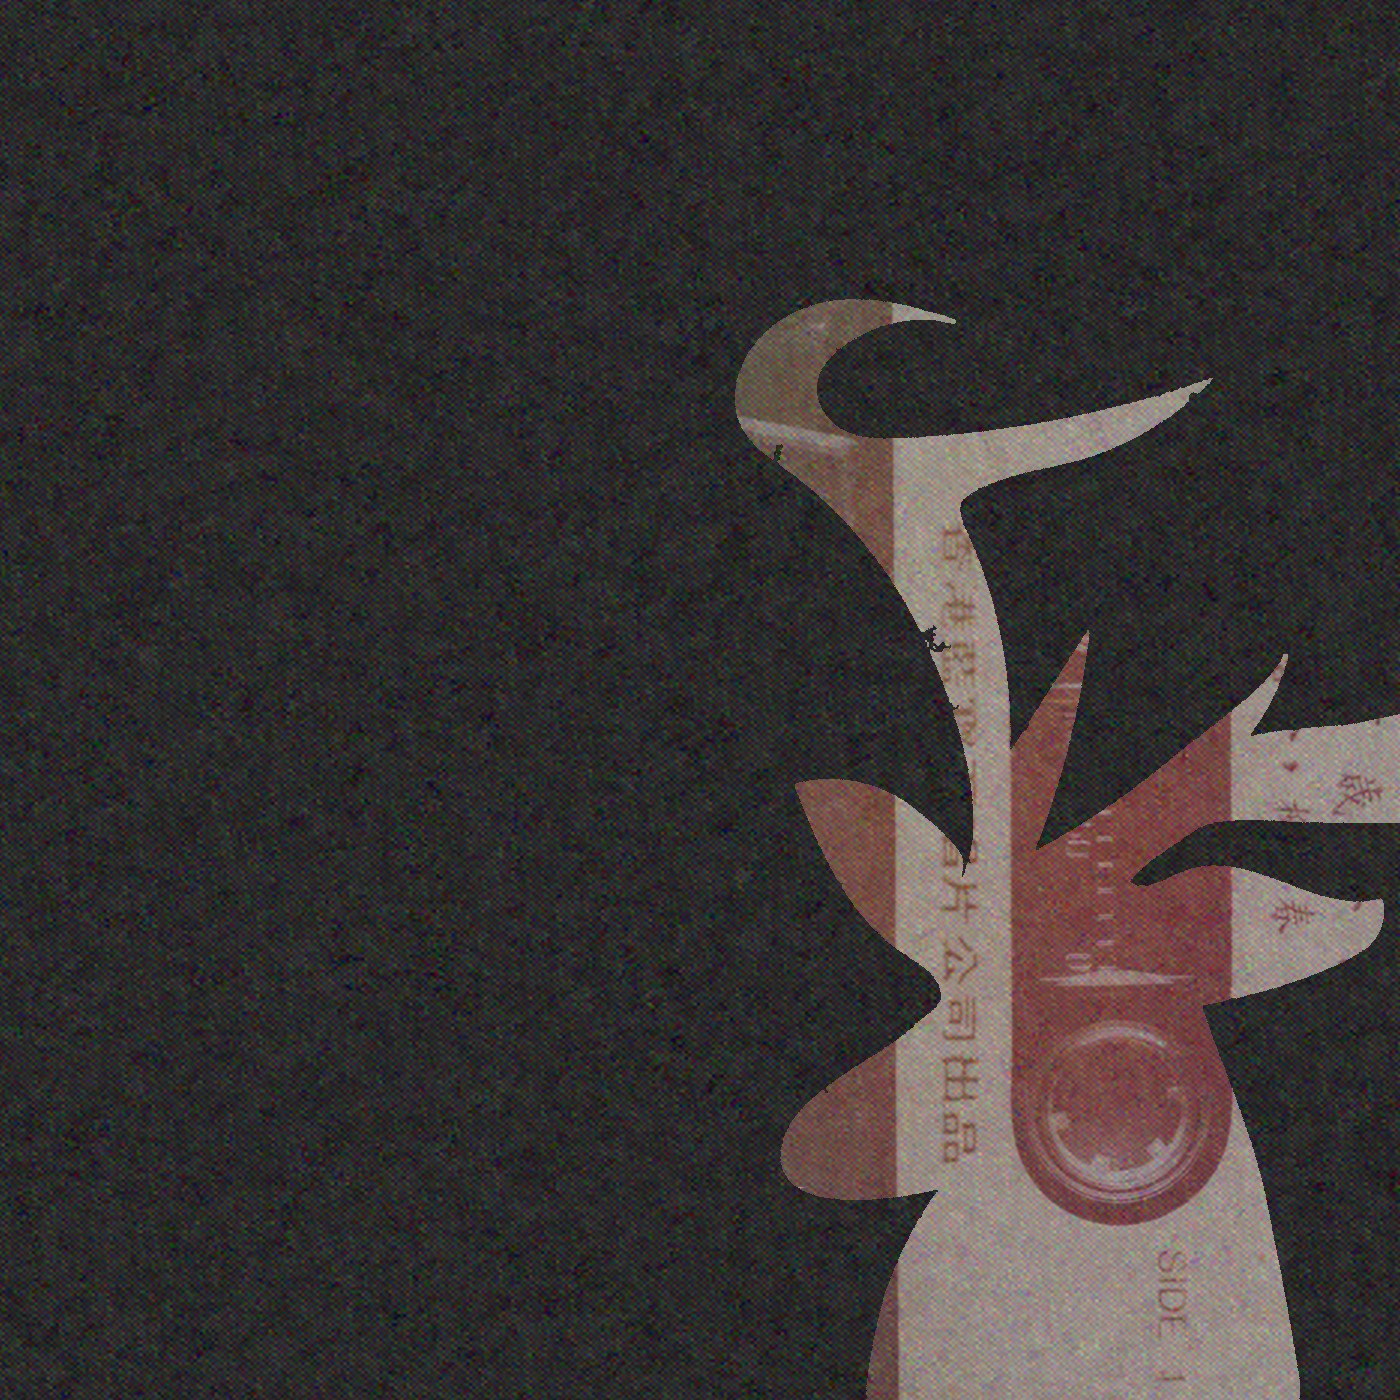 A deer silhouette made of a reddish cassette with characters on it (The whole image is covered in dark static)